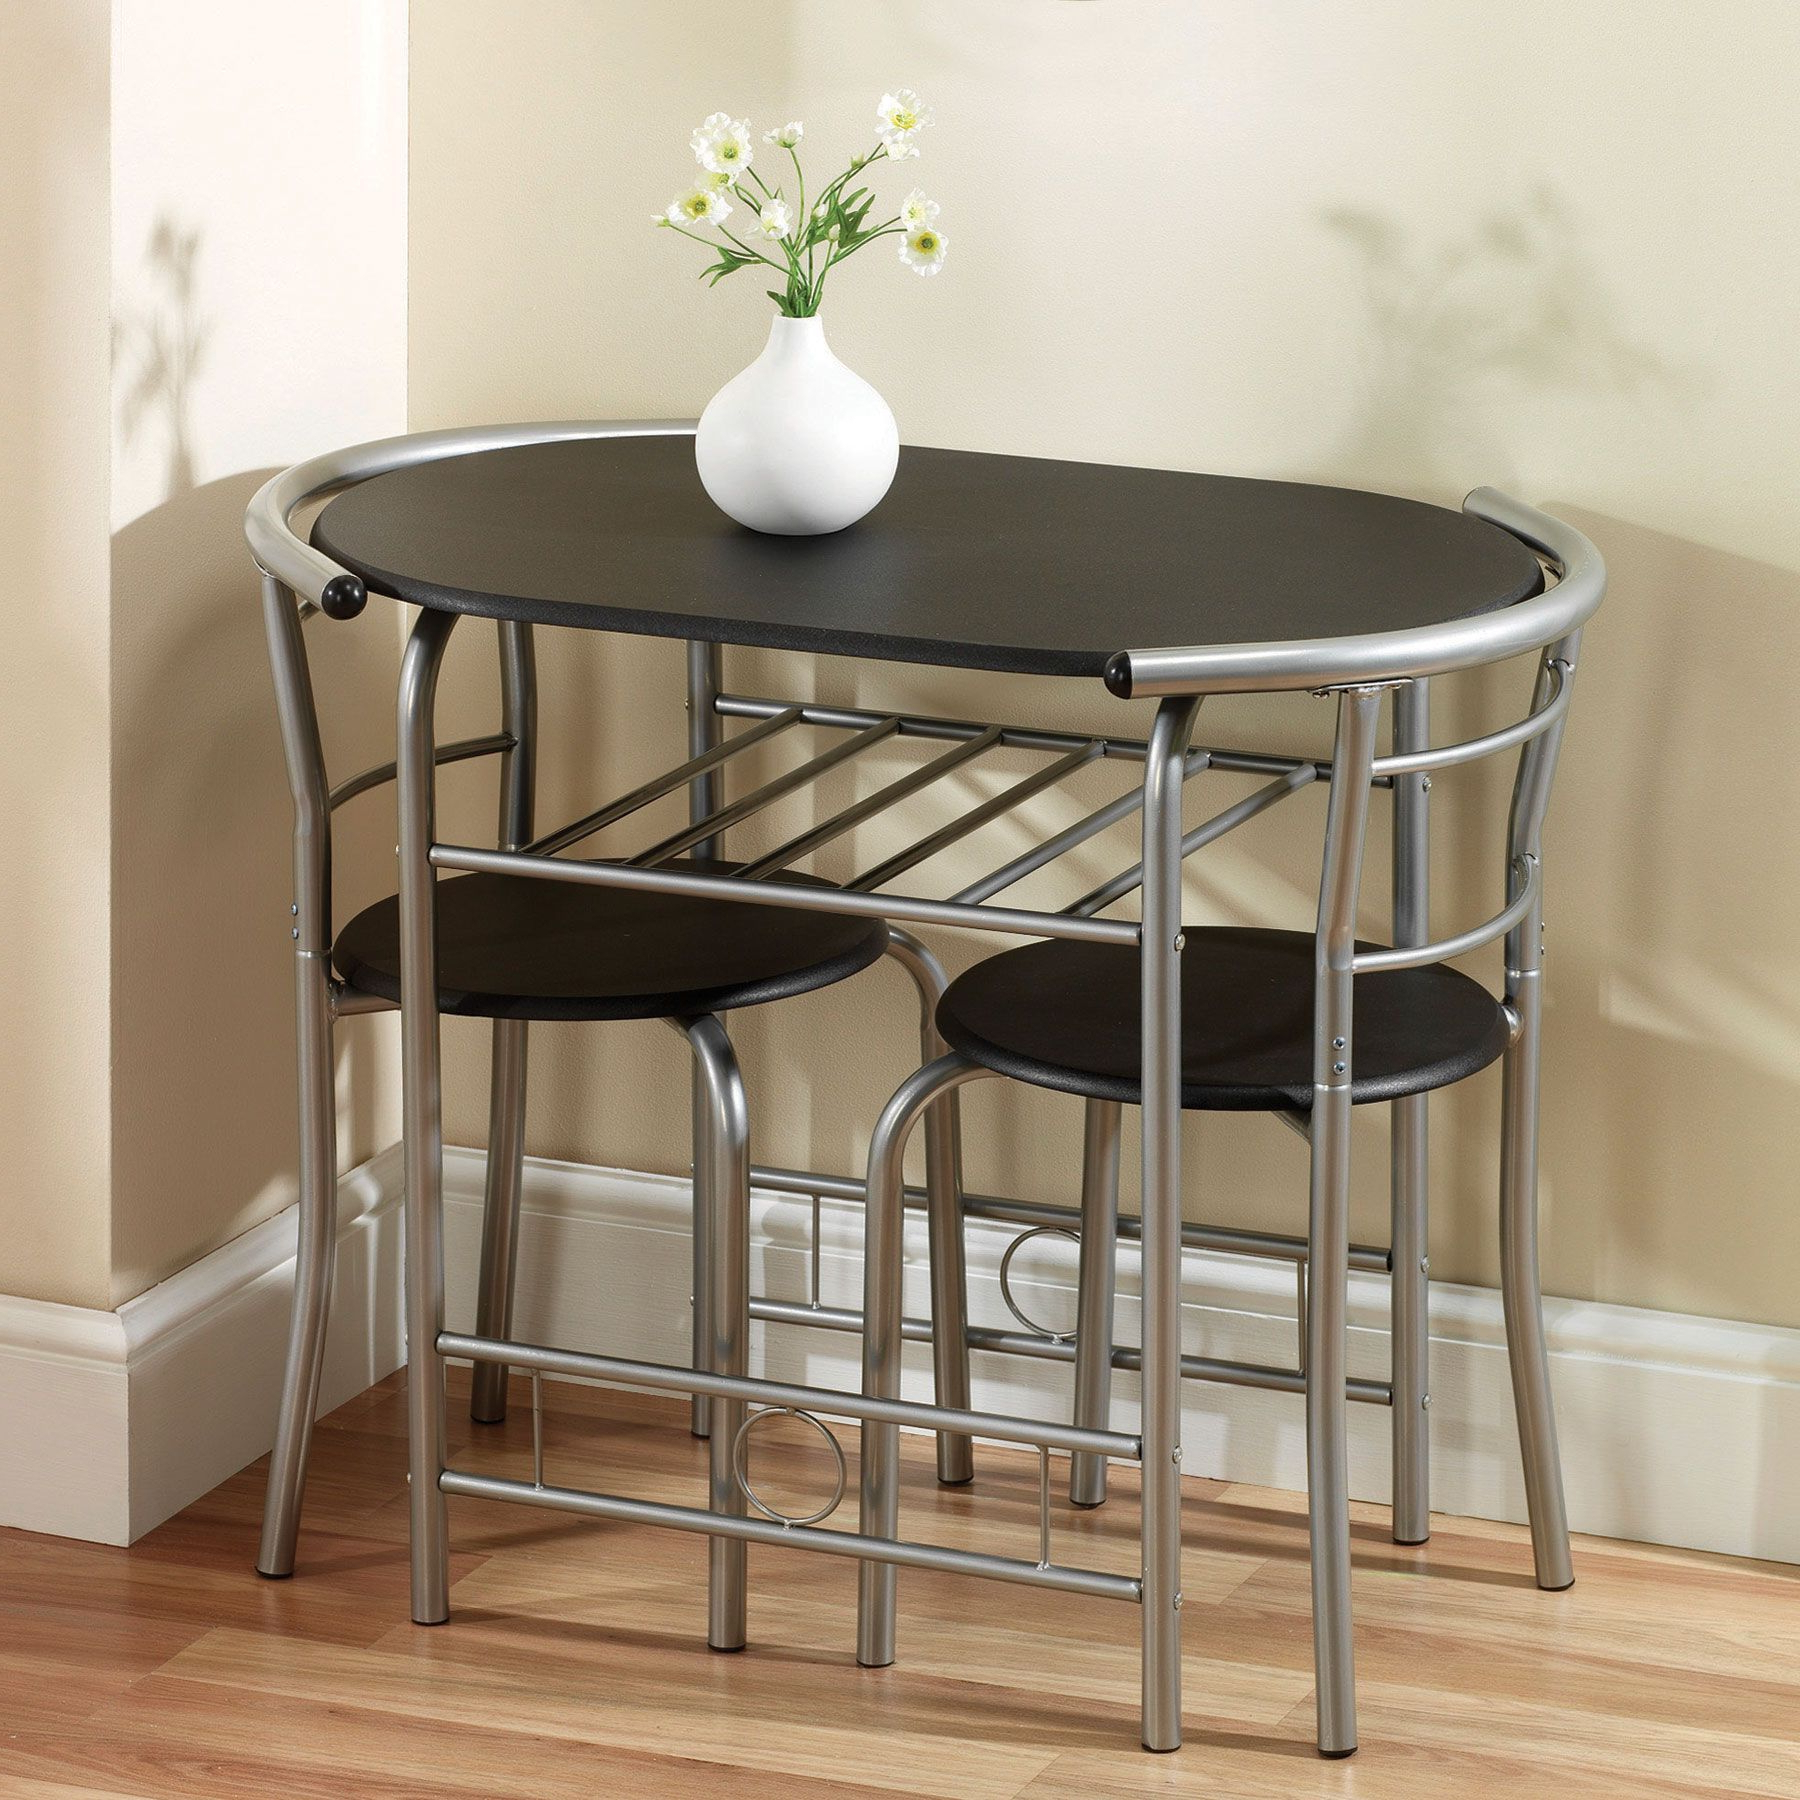 Space Saving Dining Table Compact, Small Dining Room Table For 4